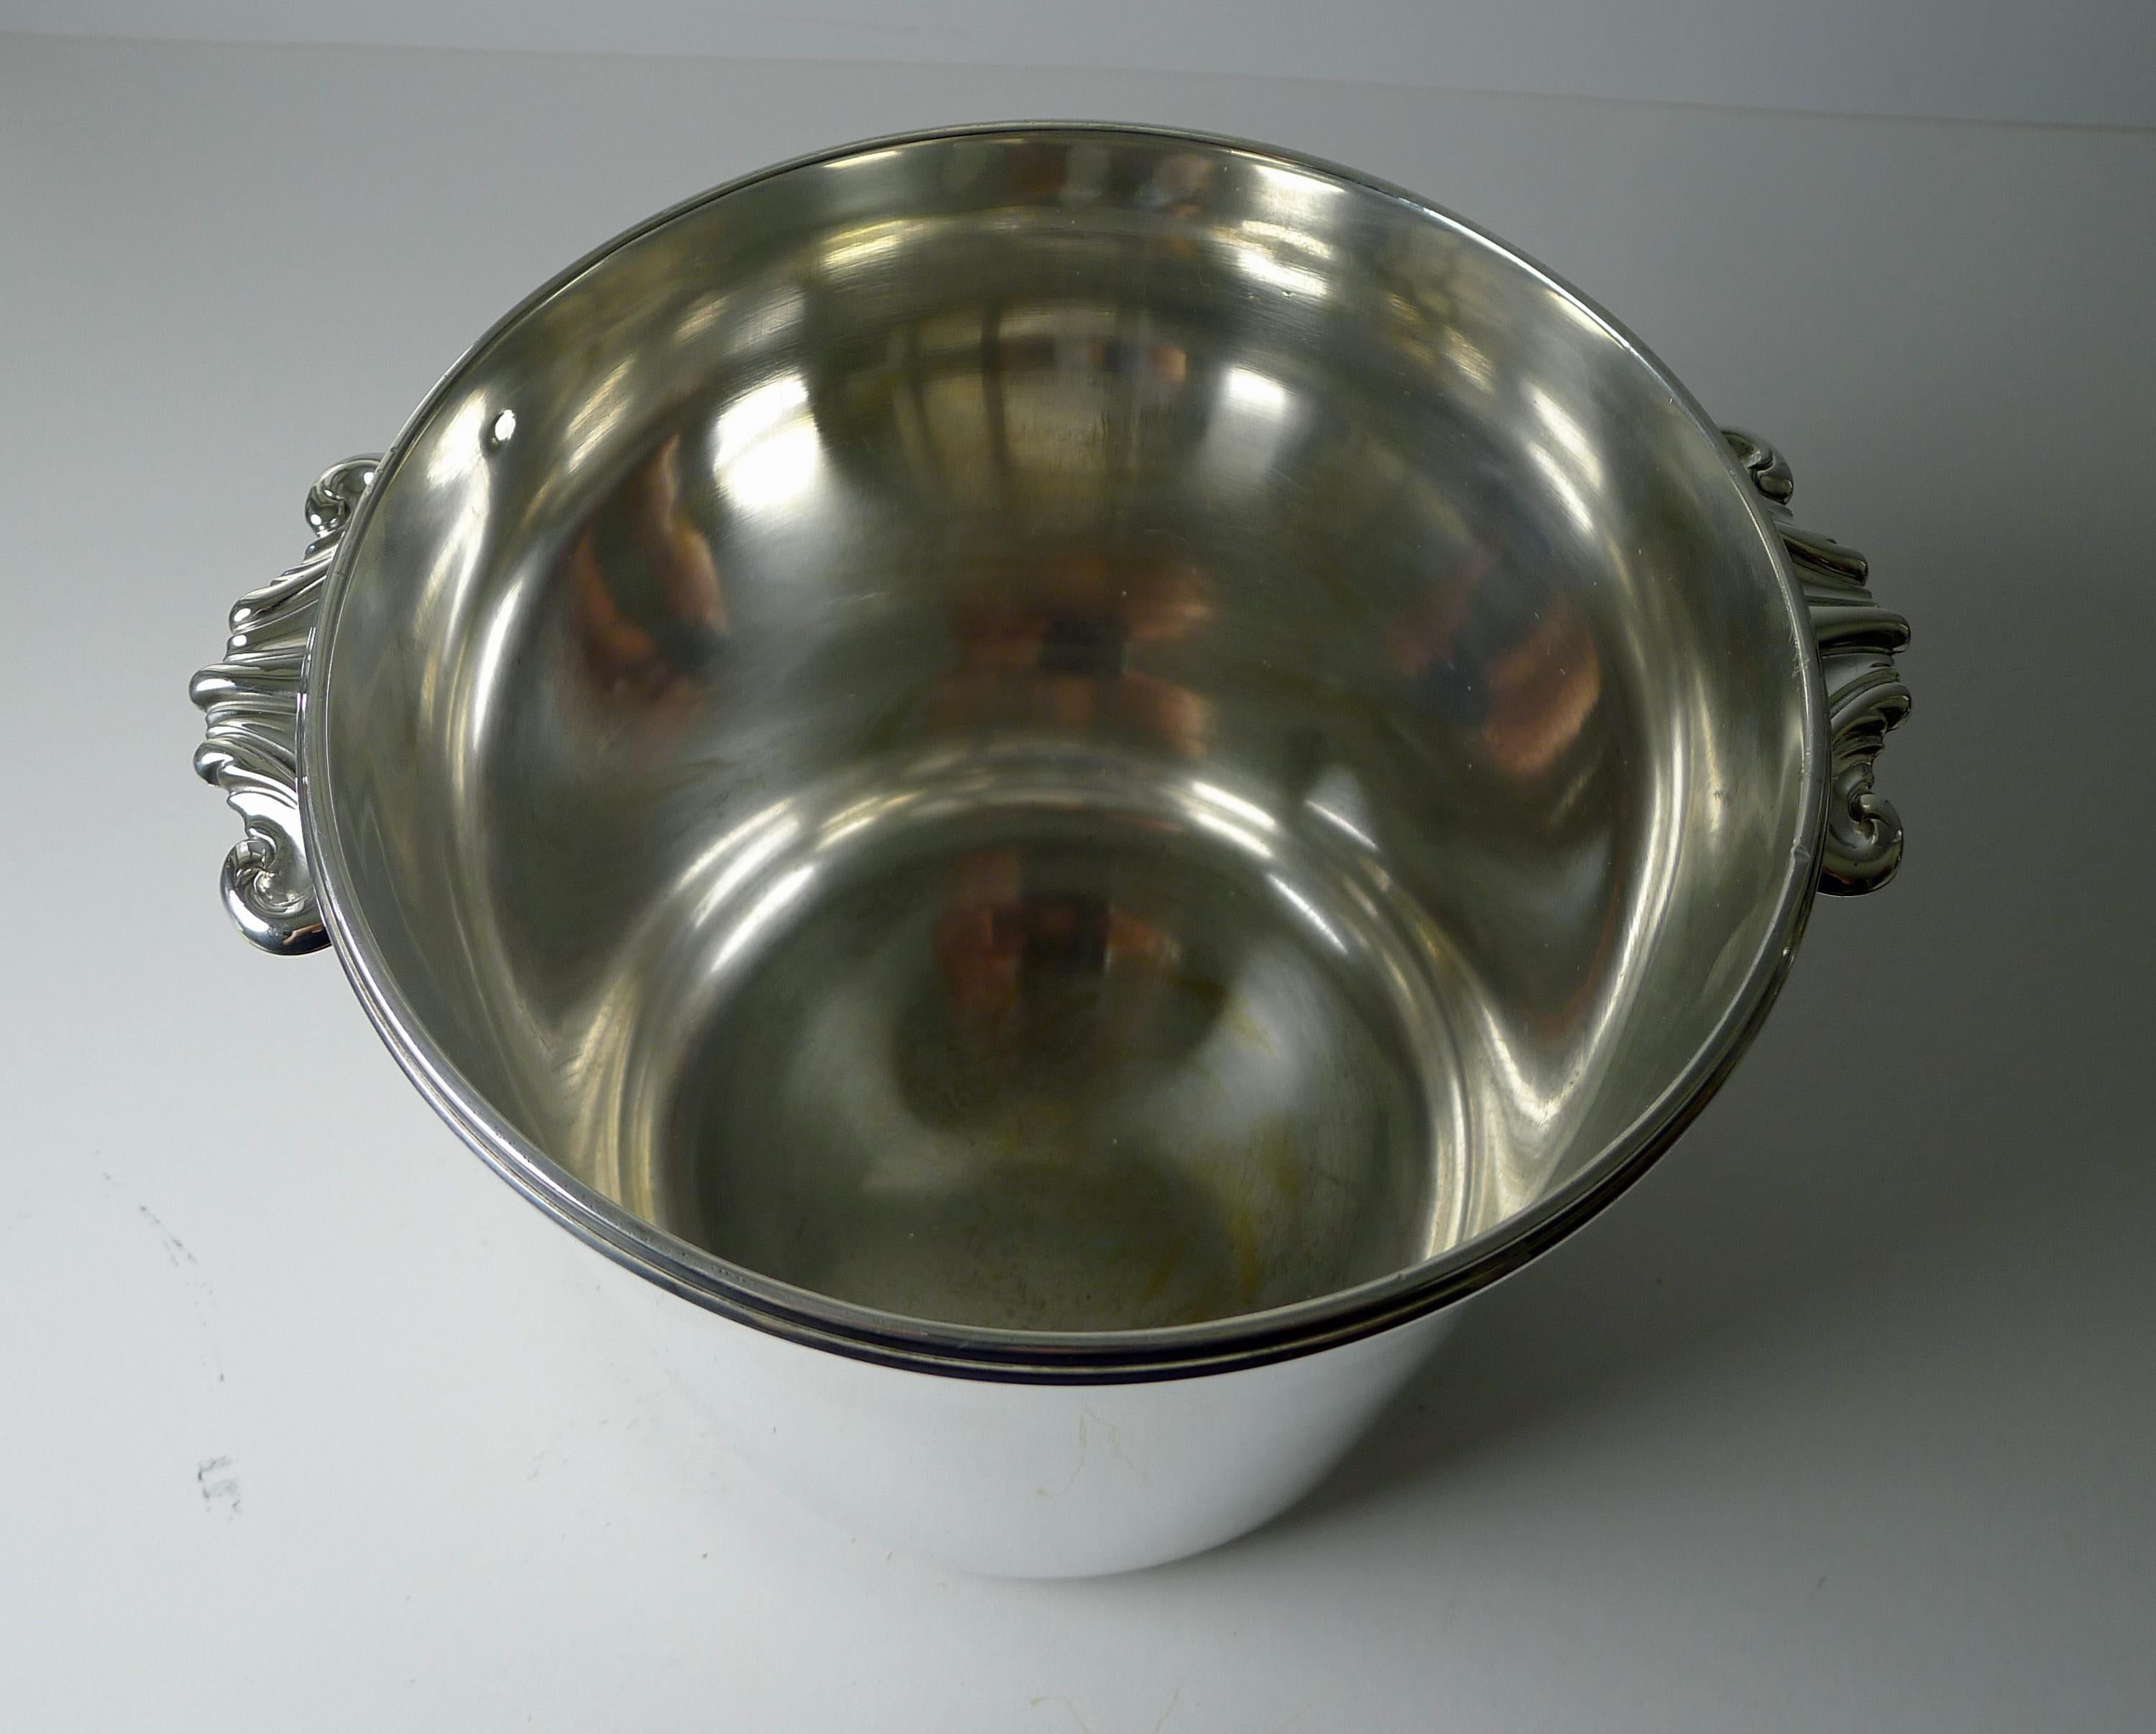 Vintage French Silver Plated Wine or Champagne Cooler / Bucket, Puiforcat For Sale 6